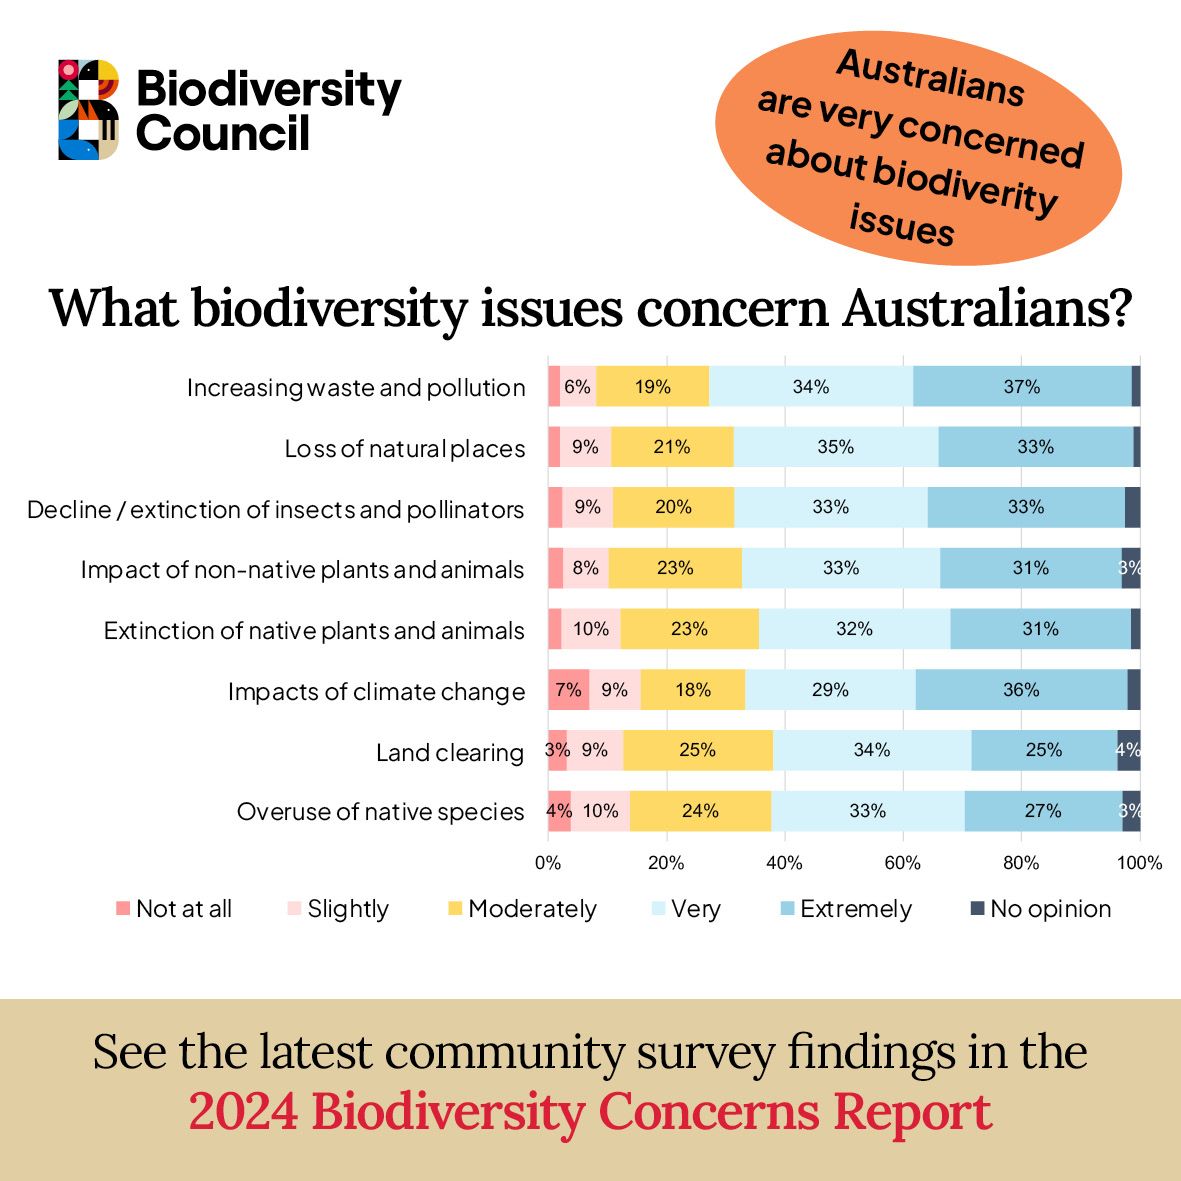 Almost ALL Australians are at least moderately concerned about biodiversity issues These are just some of the findings from new research undertaken by @MonashUni for the @Biodivcouncil Read the full report at: biodiversitycouncil.org.au/resources/2024…